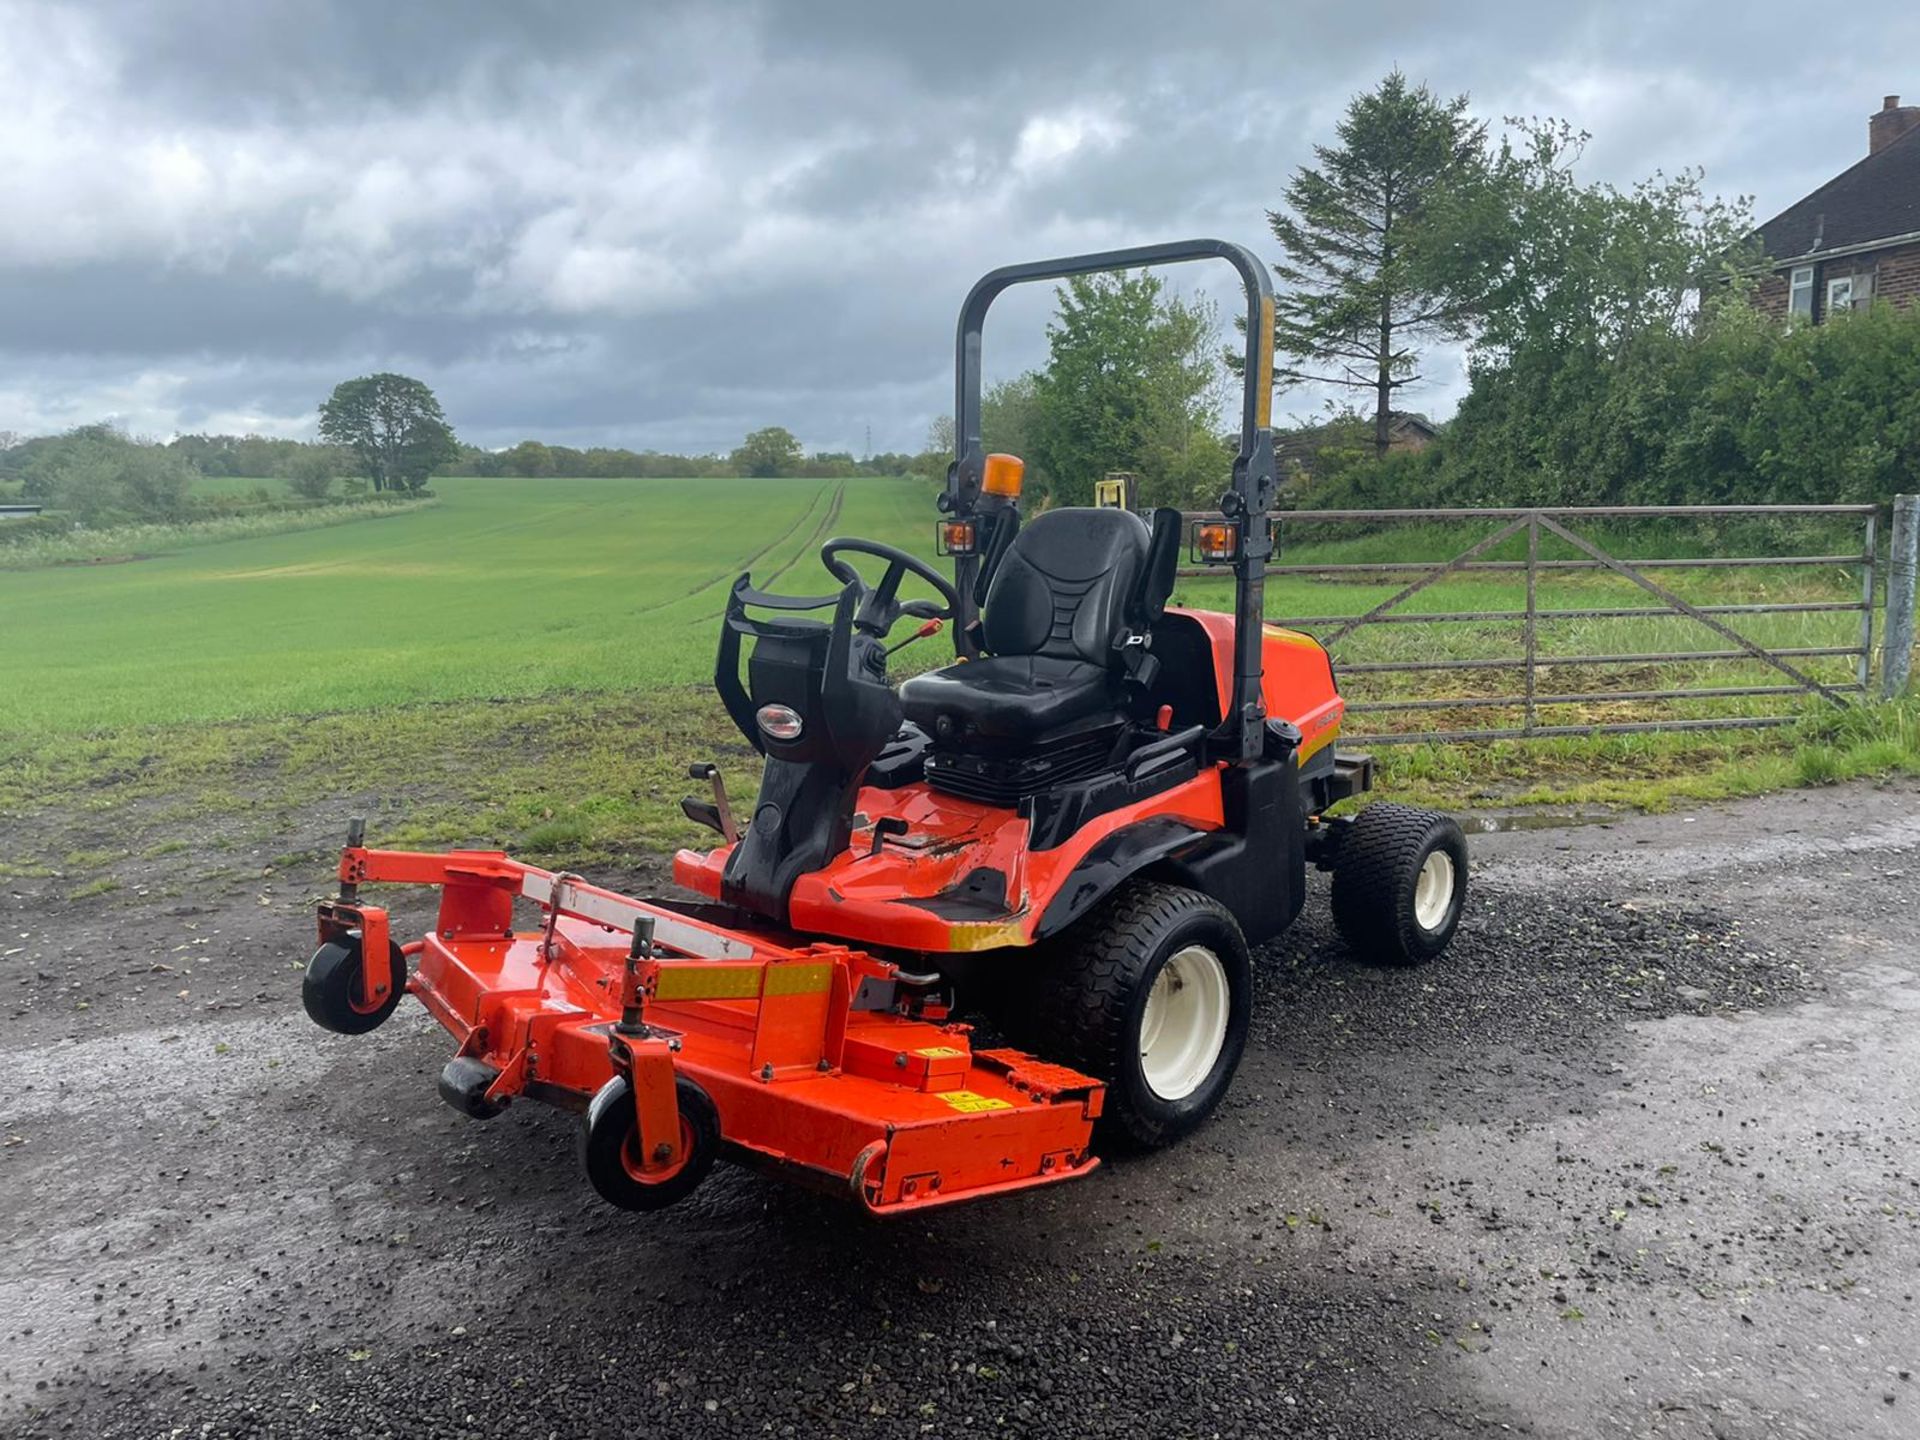 2014 KUBOTA F3890 RIDE ON MOWER, RUNS DRIVES AND CUTS, SHOWING A LOW 1772 HOURS *PLUS VAT* - Image 2 of 7